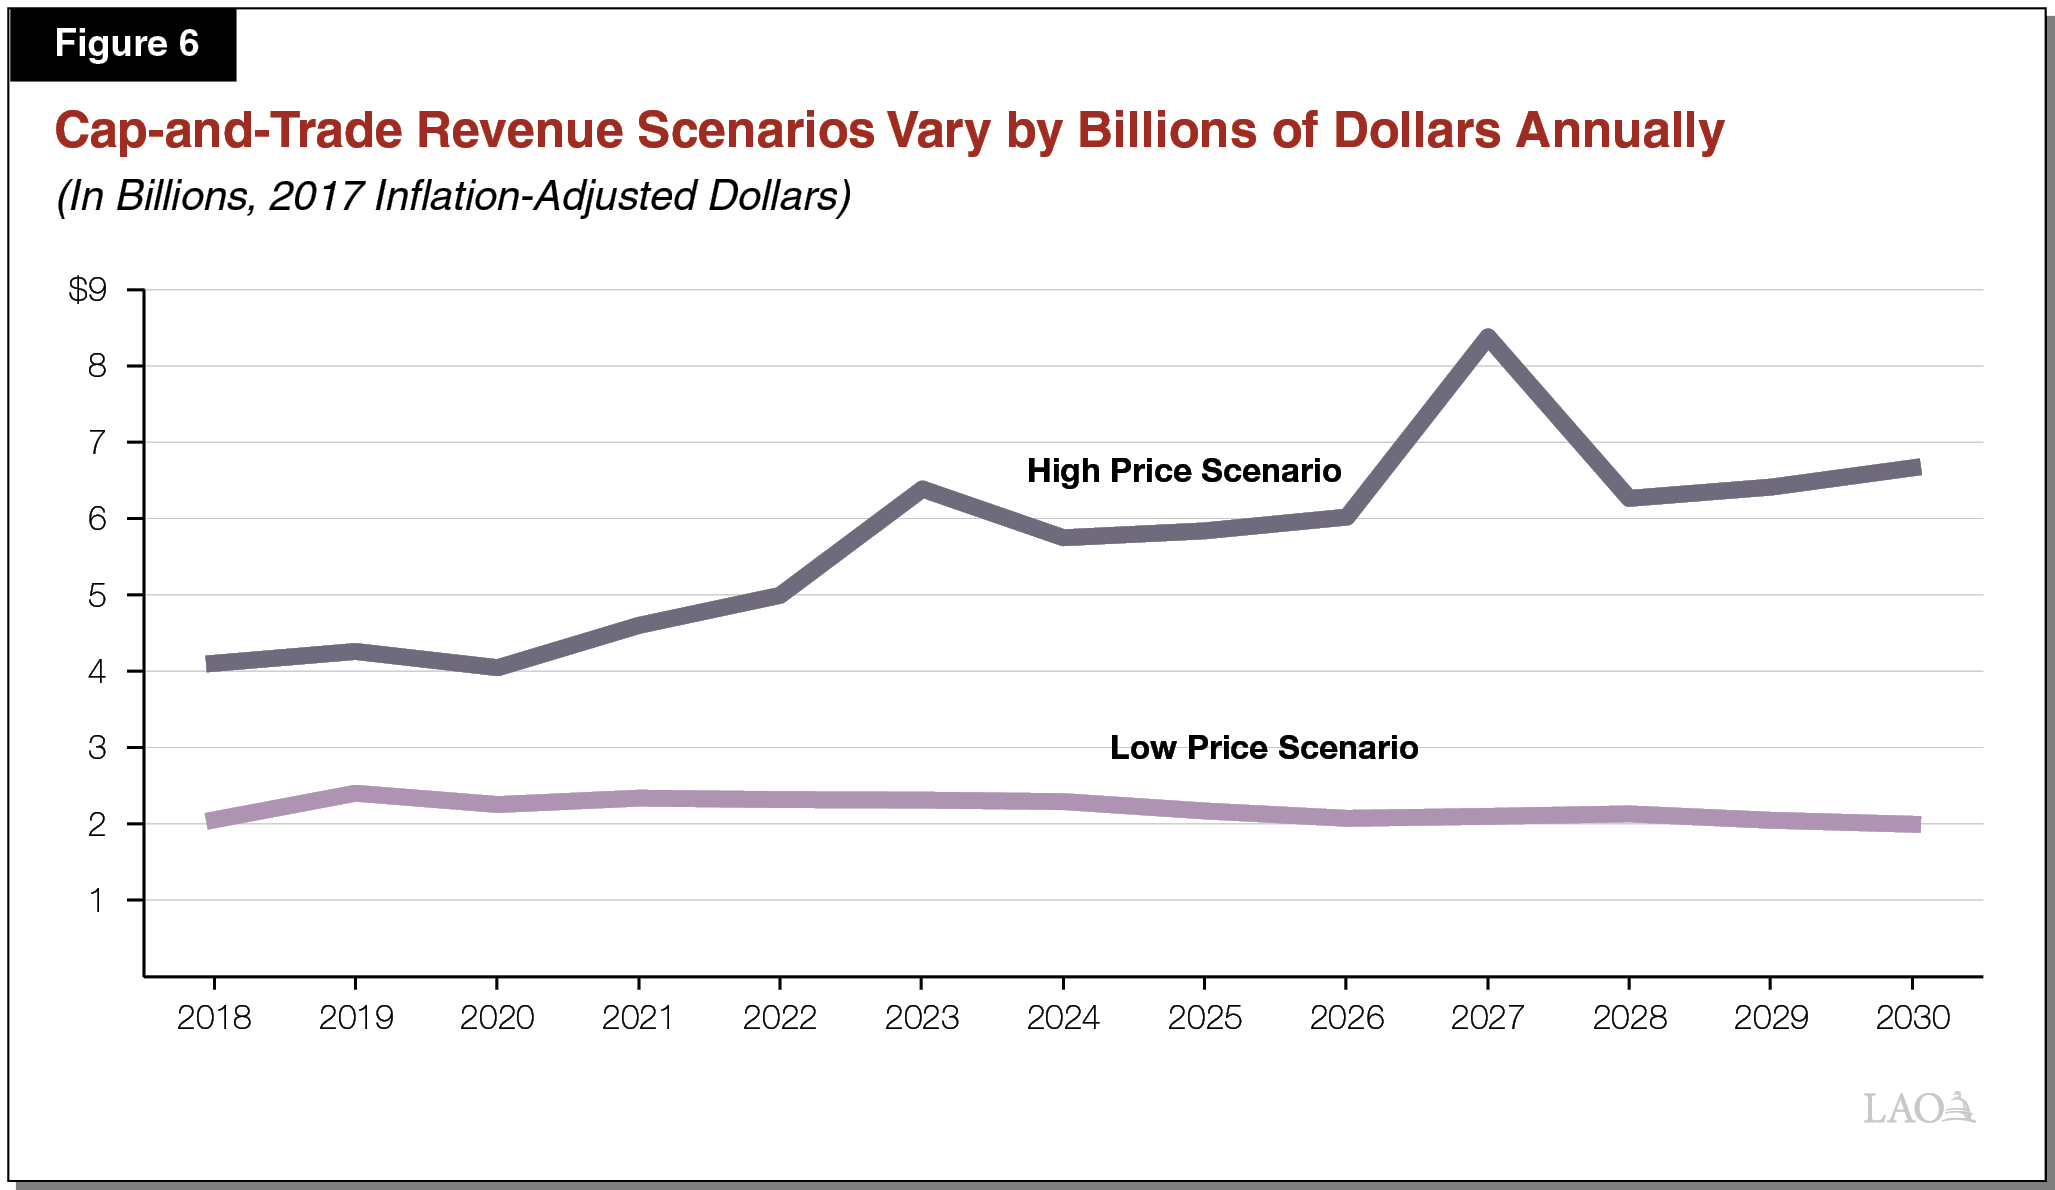 Figure 6 - Cap-and-Trade Revenue Scenarios Vary by Billions of Dollars Annually